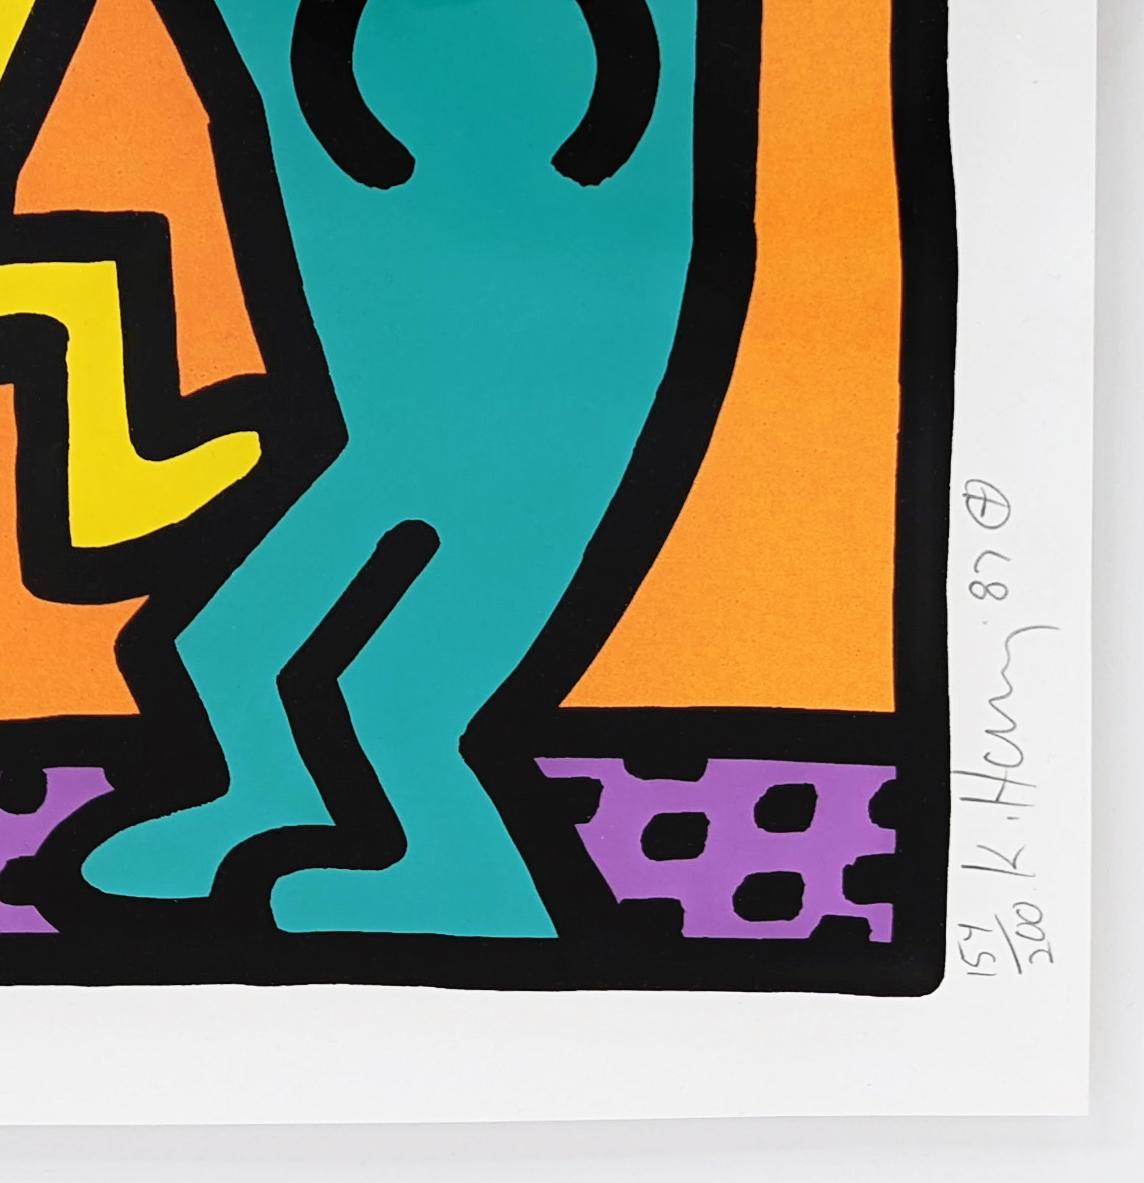 “Untitled” from Pop Shop I - Print by Keith Haring